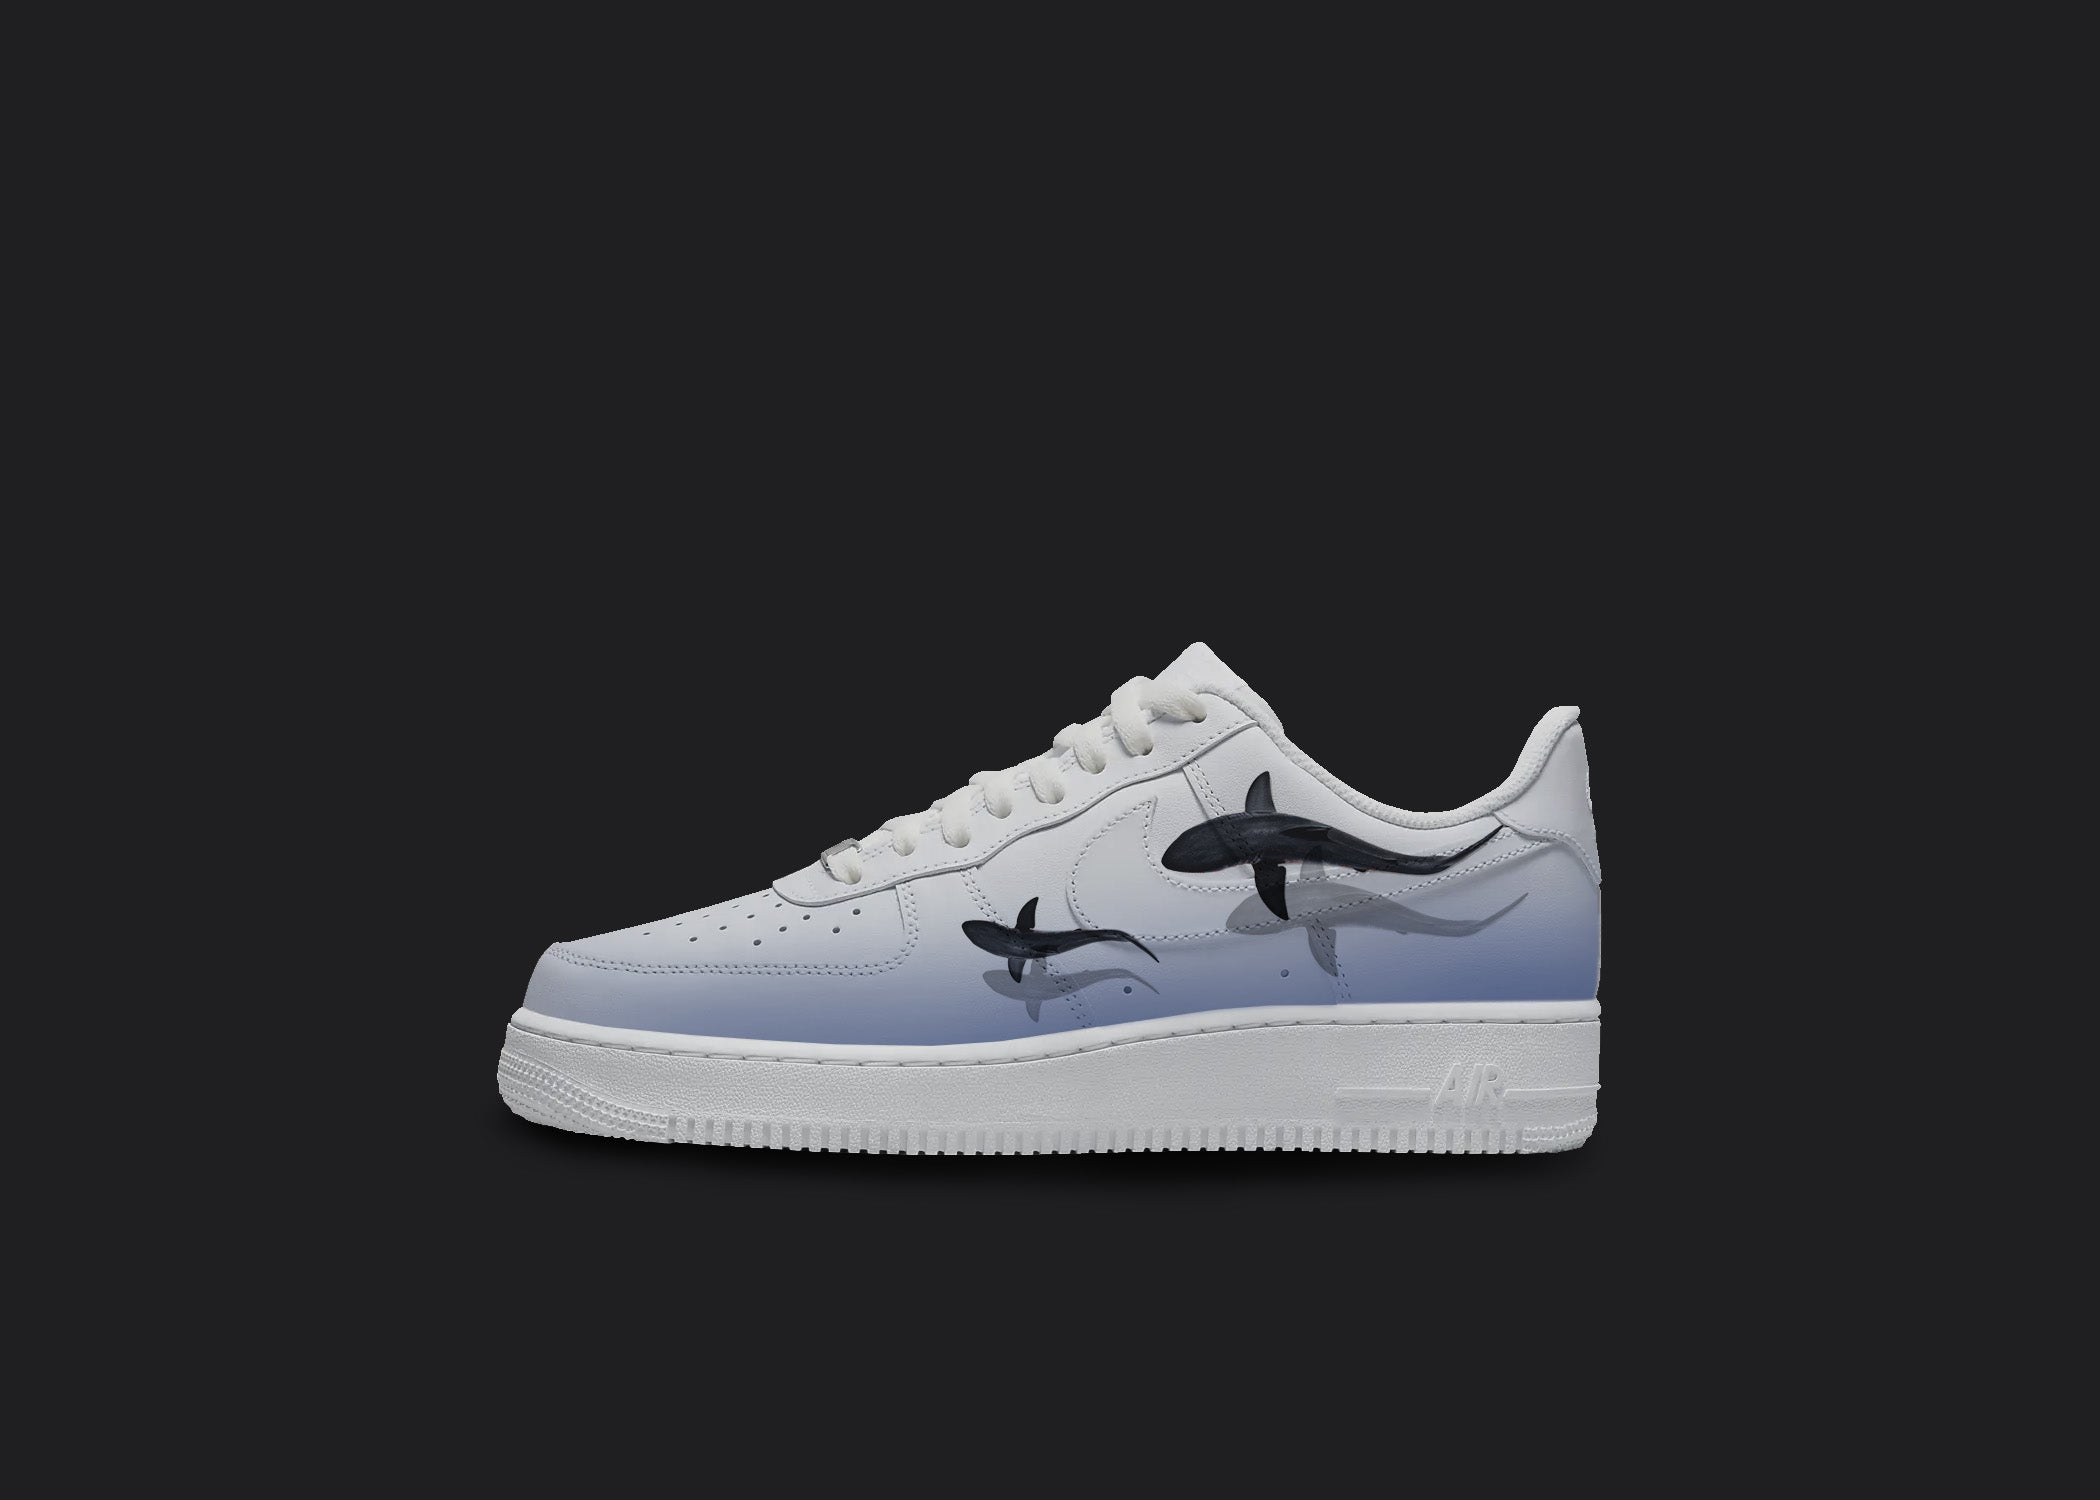 How to make Custom Louis Vuitton x Air Force 1s - Step-by-Step